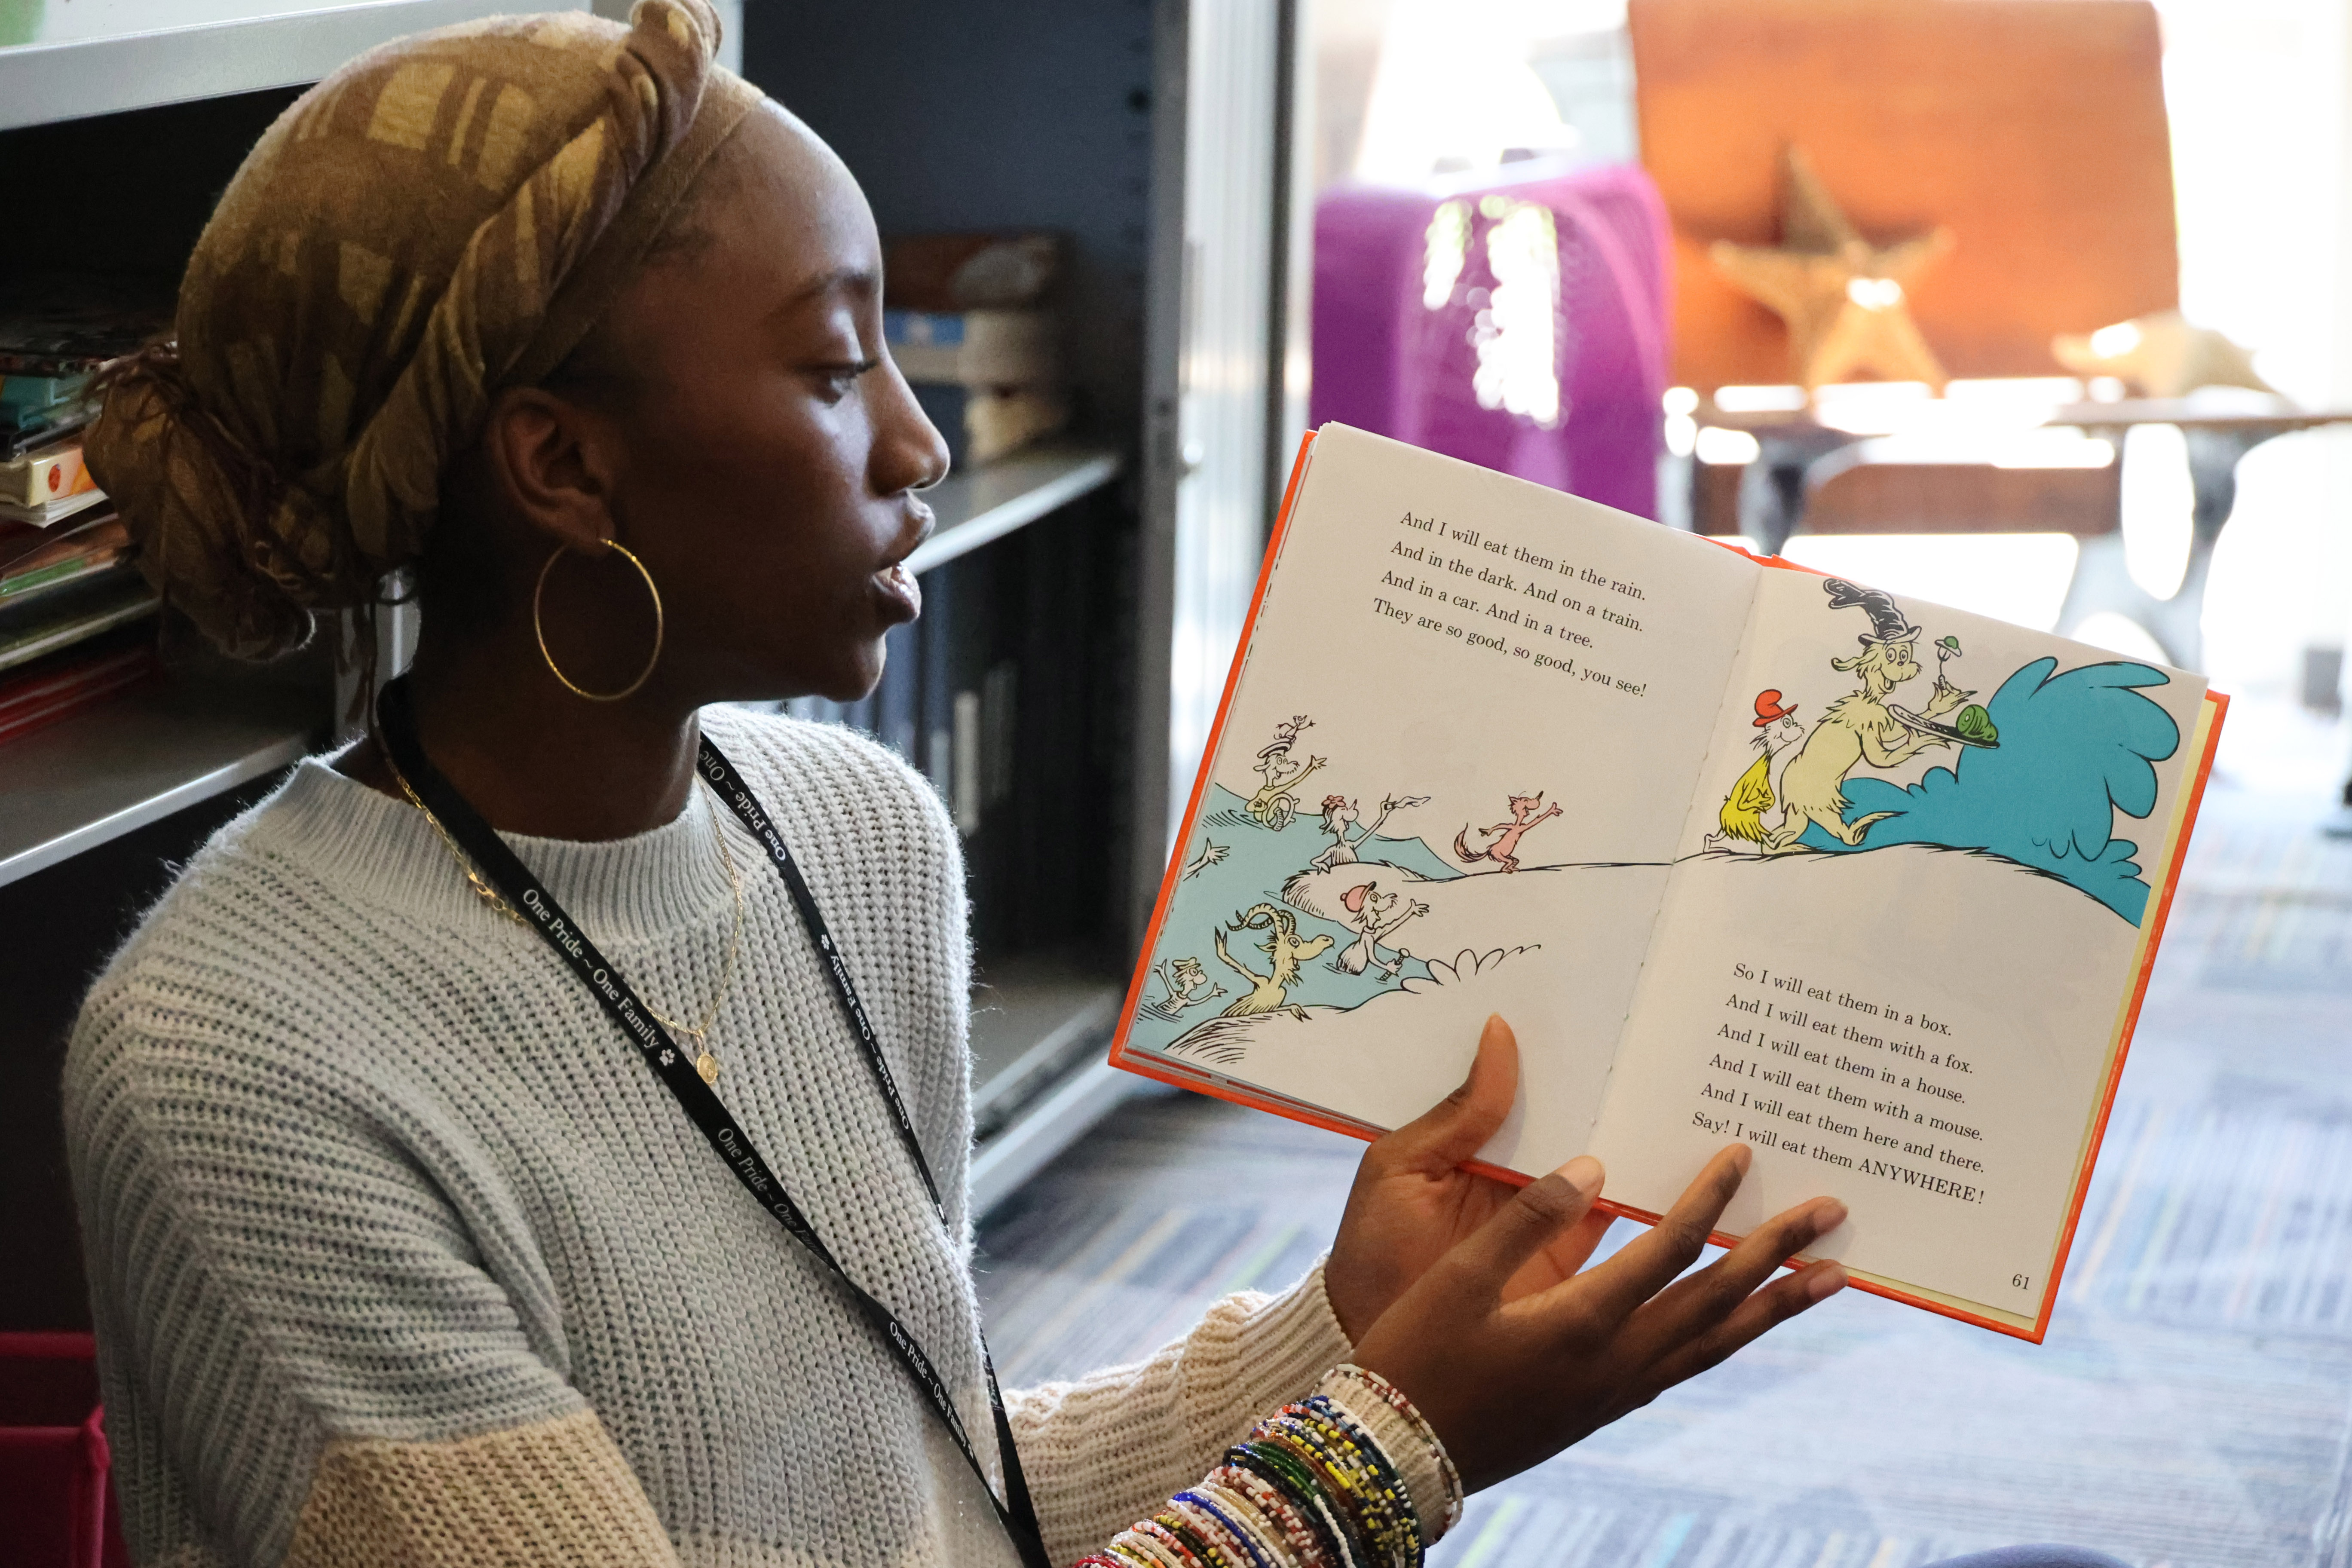 A Black, female student opens a Dr. Seuss book and begins reading to students around her.